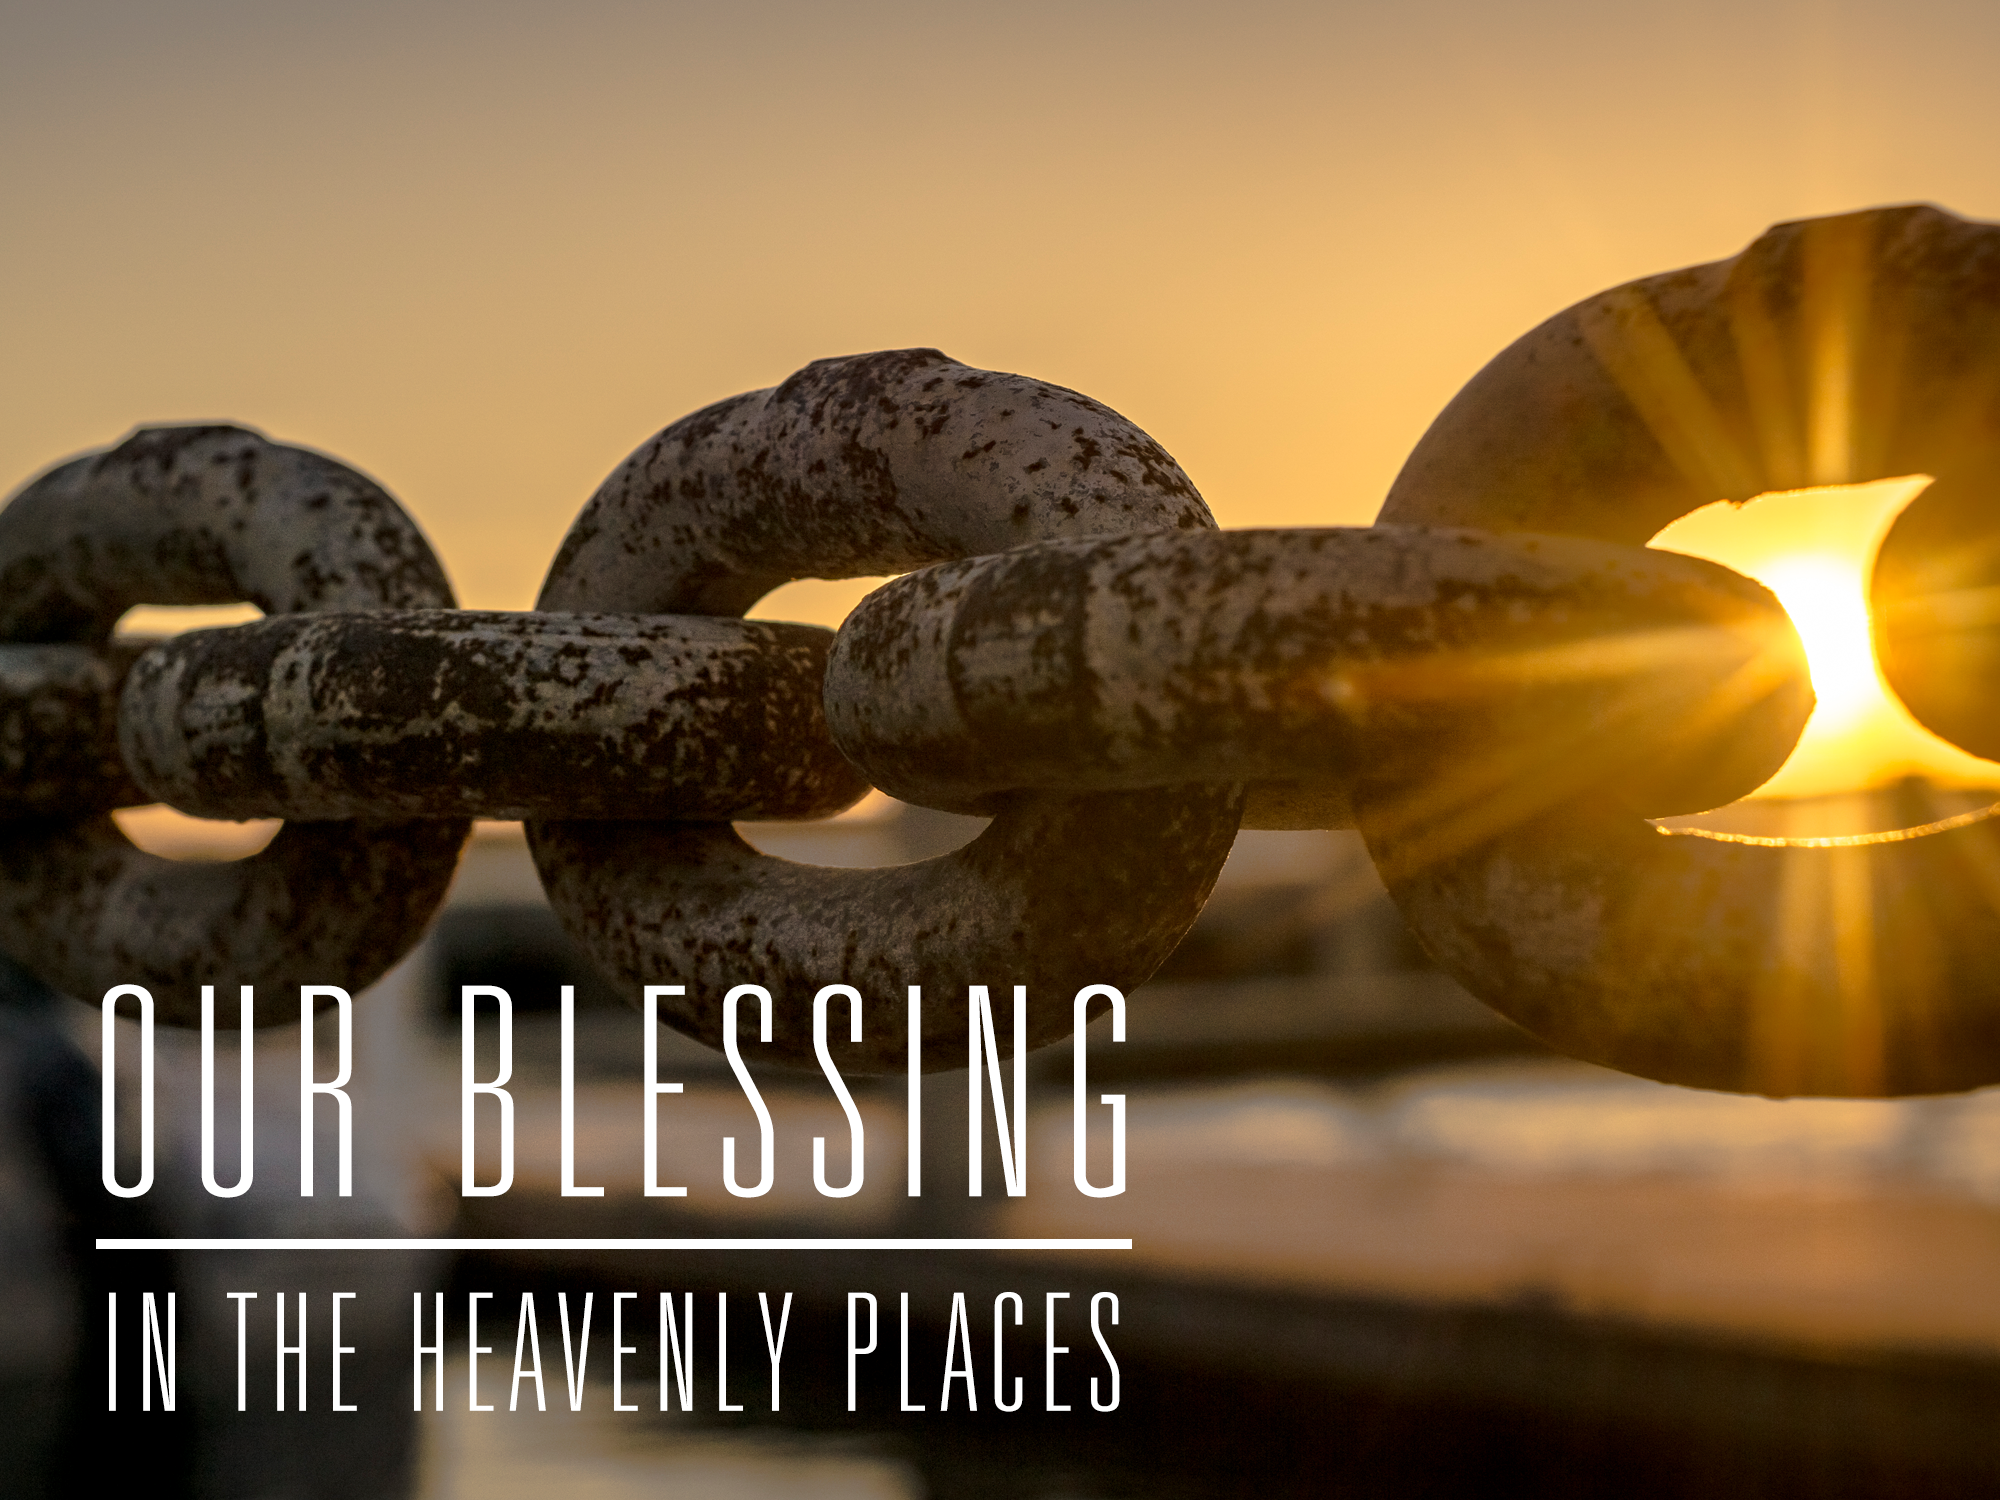 Our Blessing in the Heavenly Places